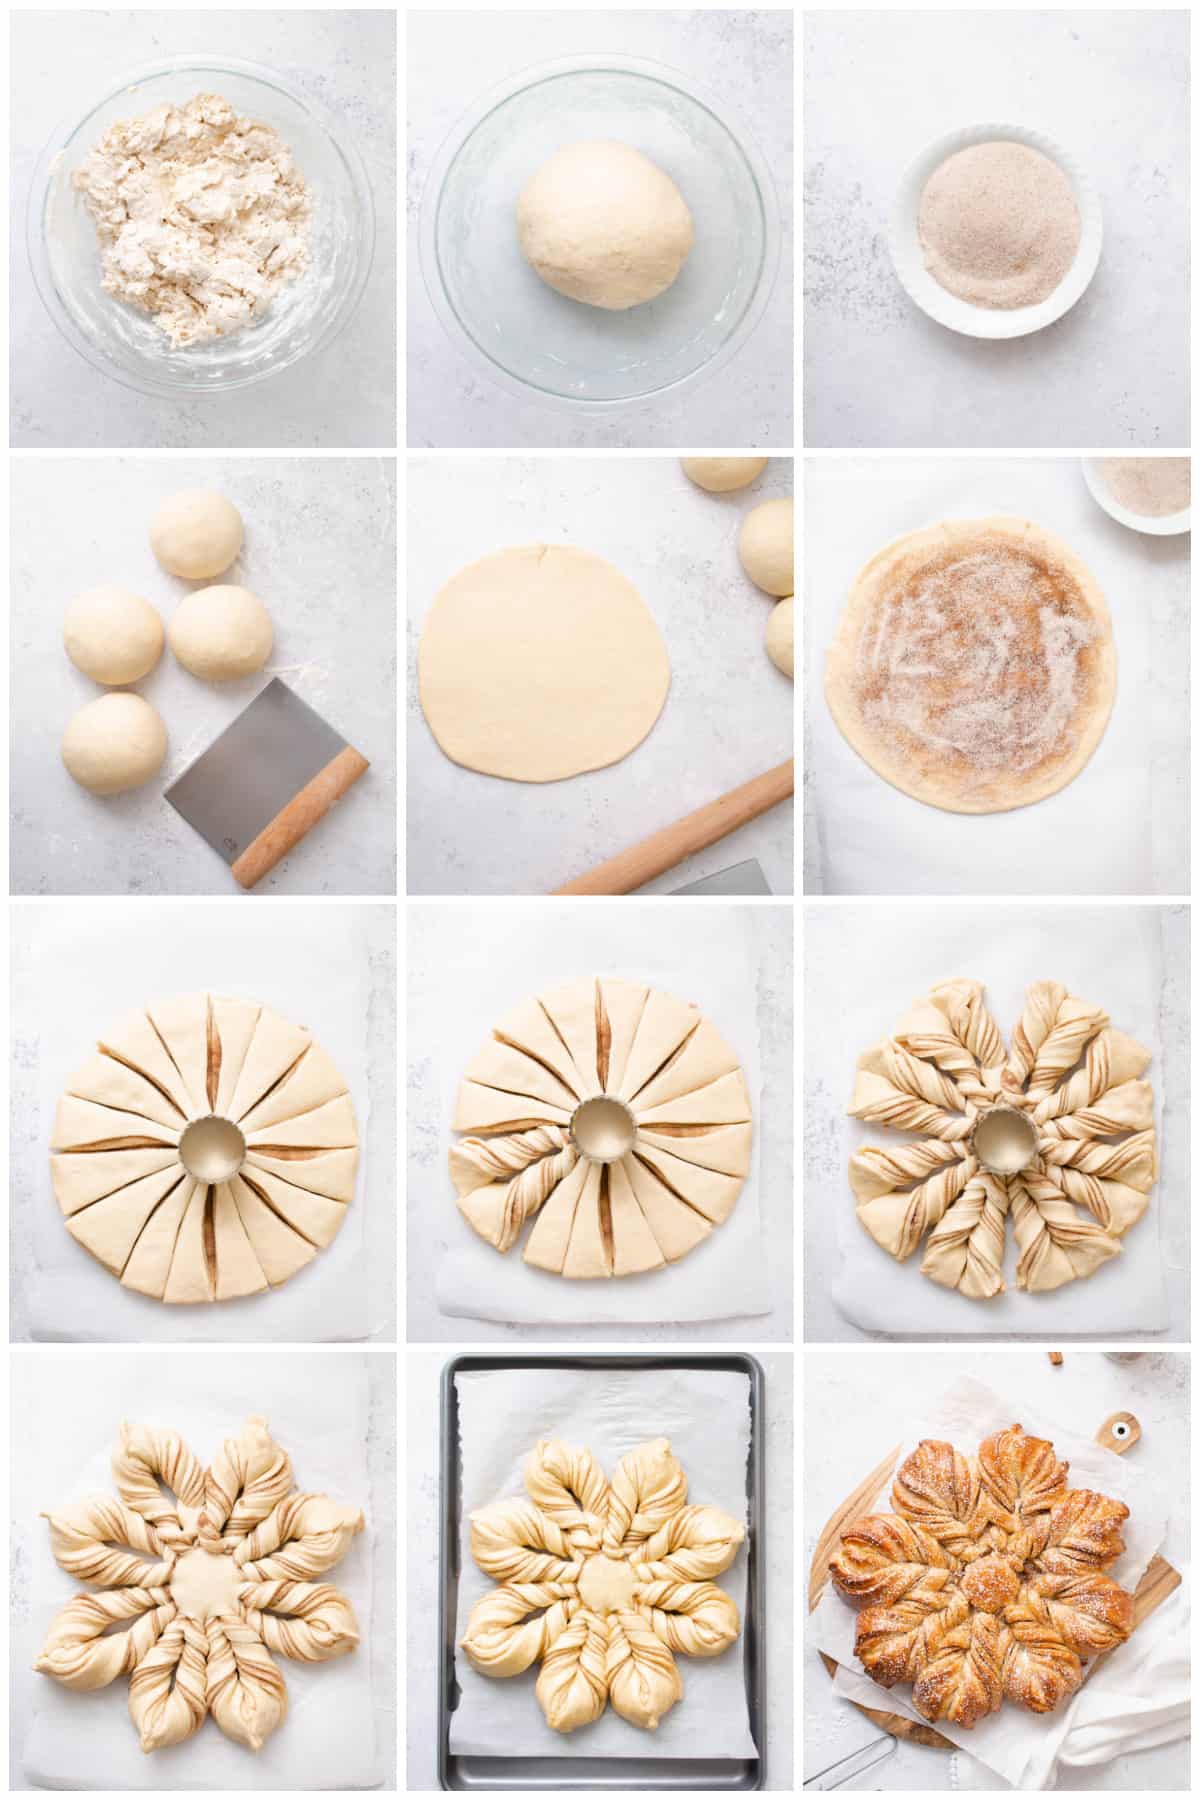 Step by step photos on how to make Star Bread.